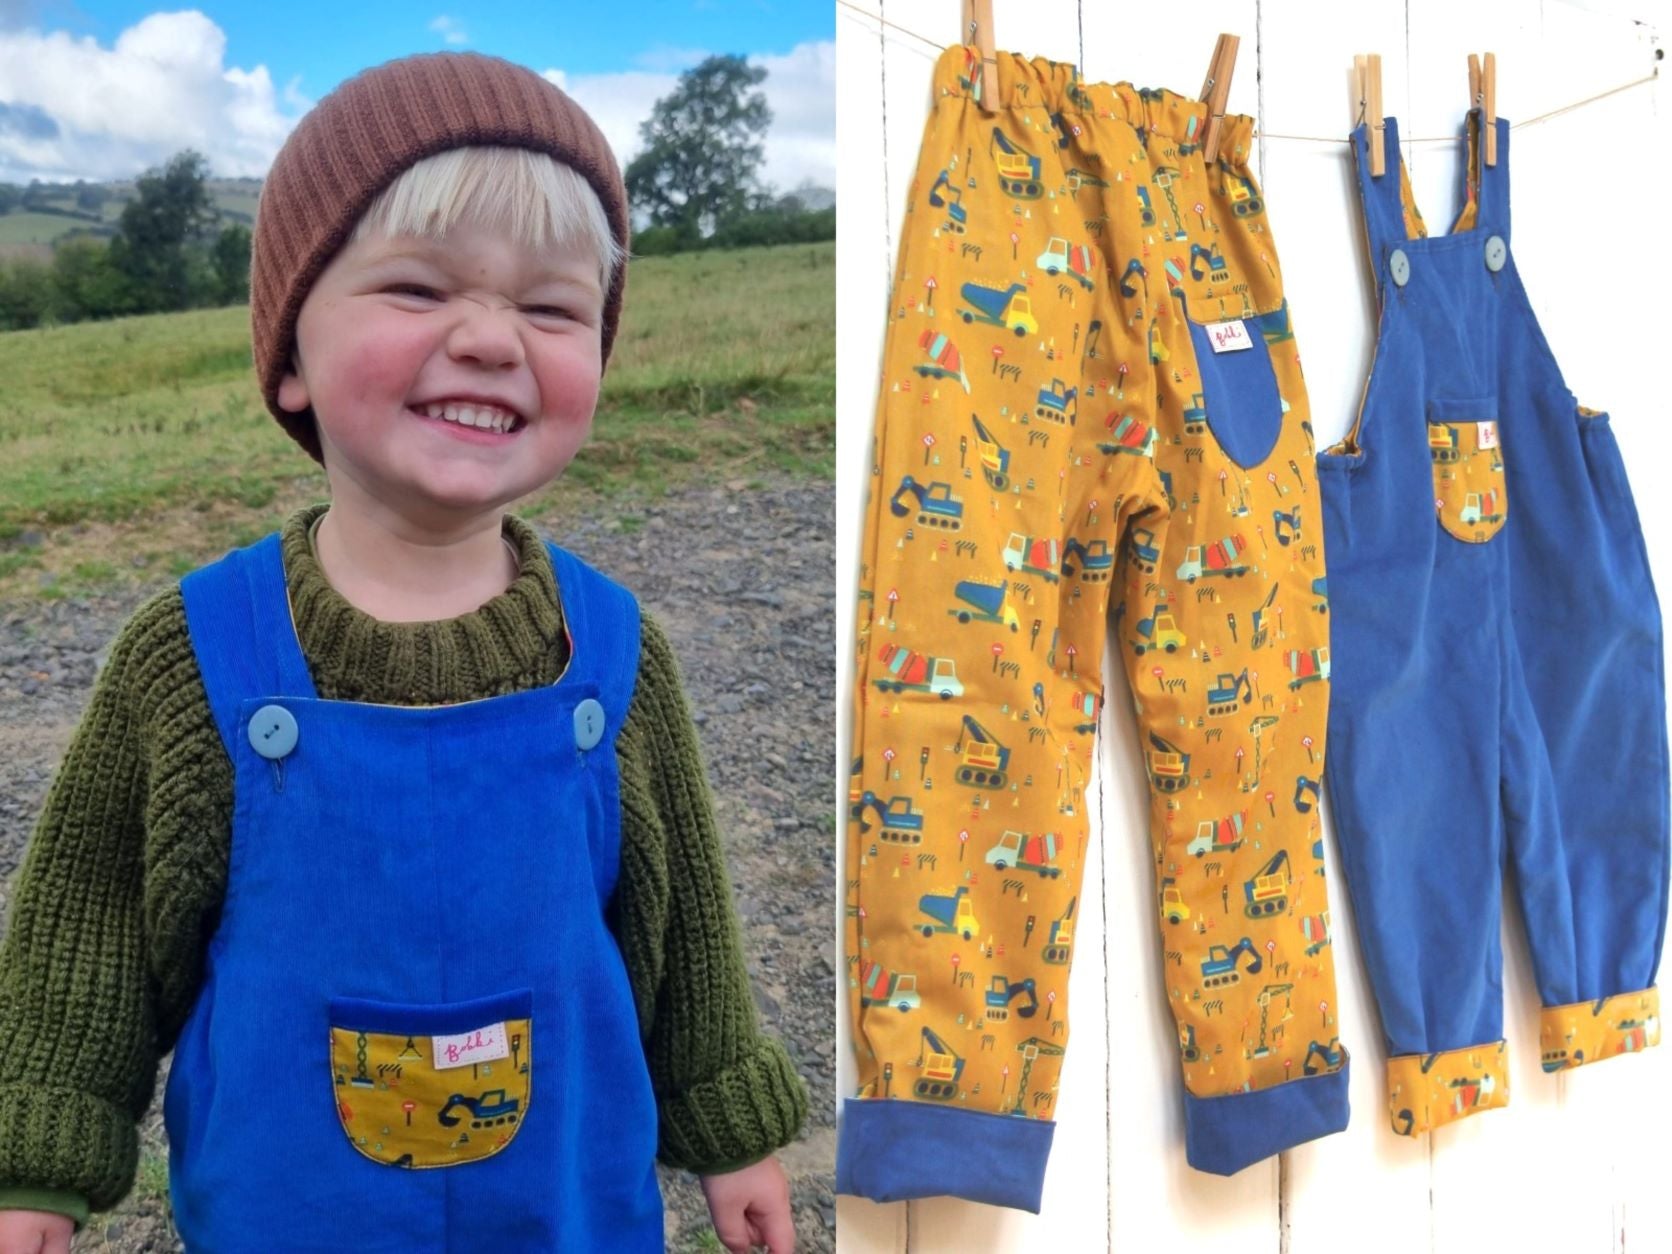 Seesaw Childrens Clothes - Reversible dungarees with needlecord on